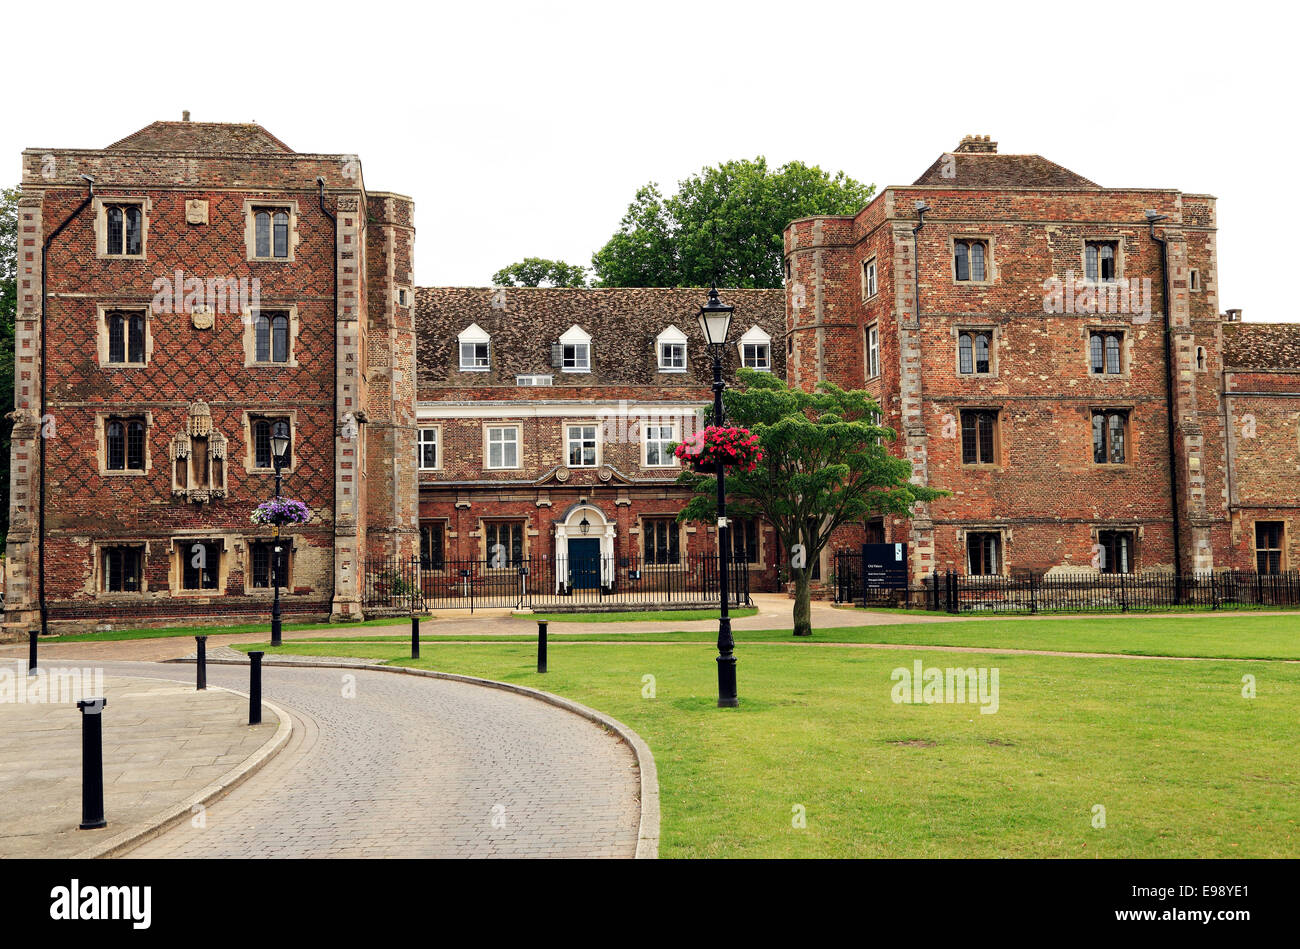 Ely, 16th century Old Bishops Palace, now Kings School sixth 6th form college, Cambridgeshire, England UK Stock Photo